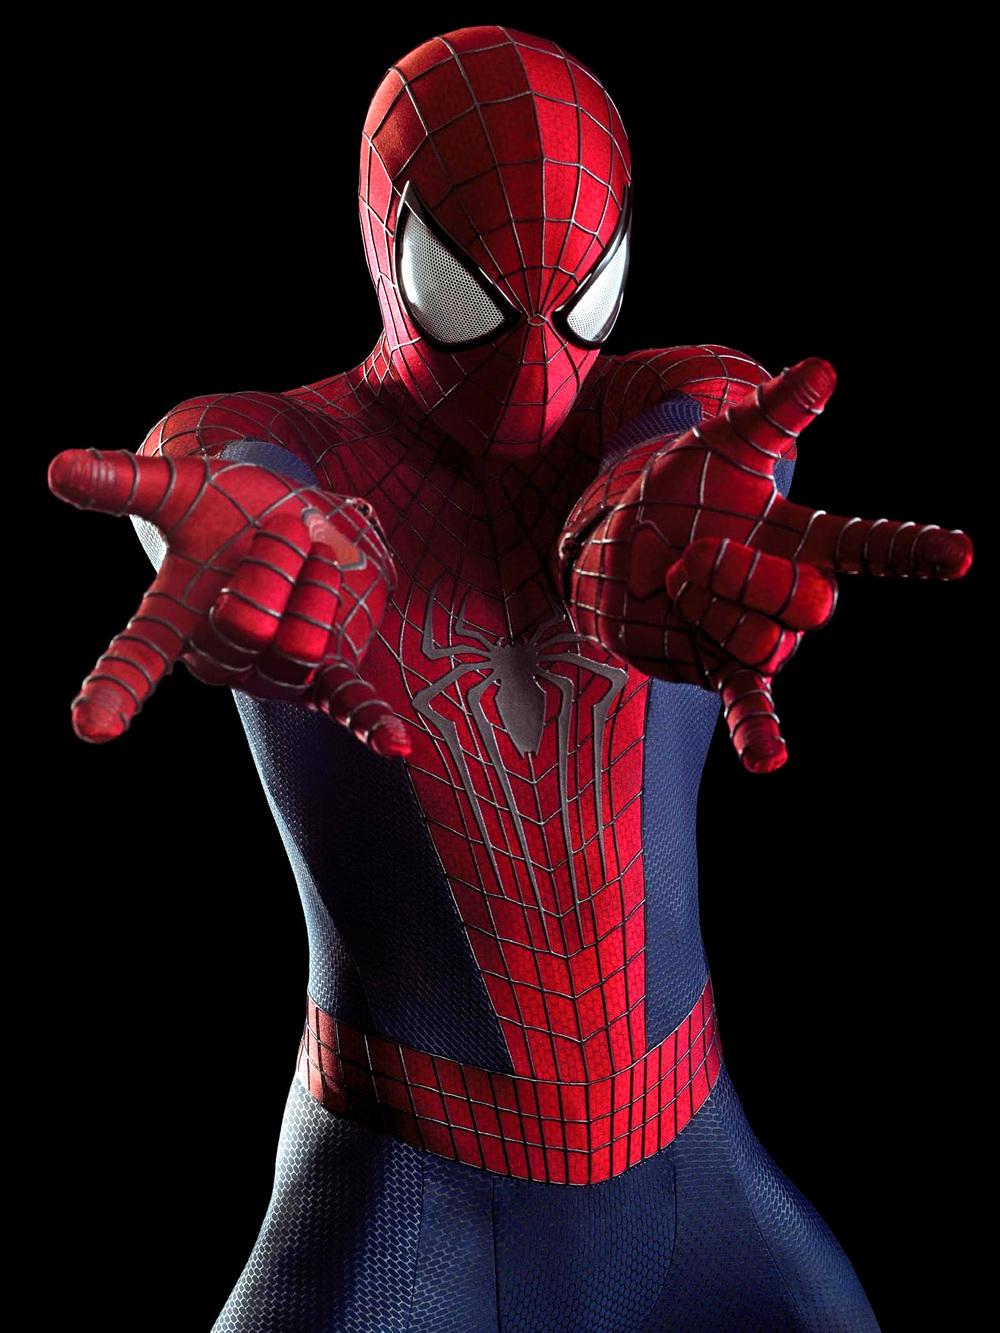 who plays spiderman in spiderman 2